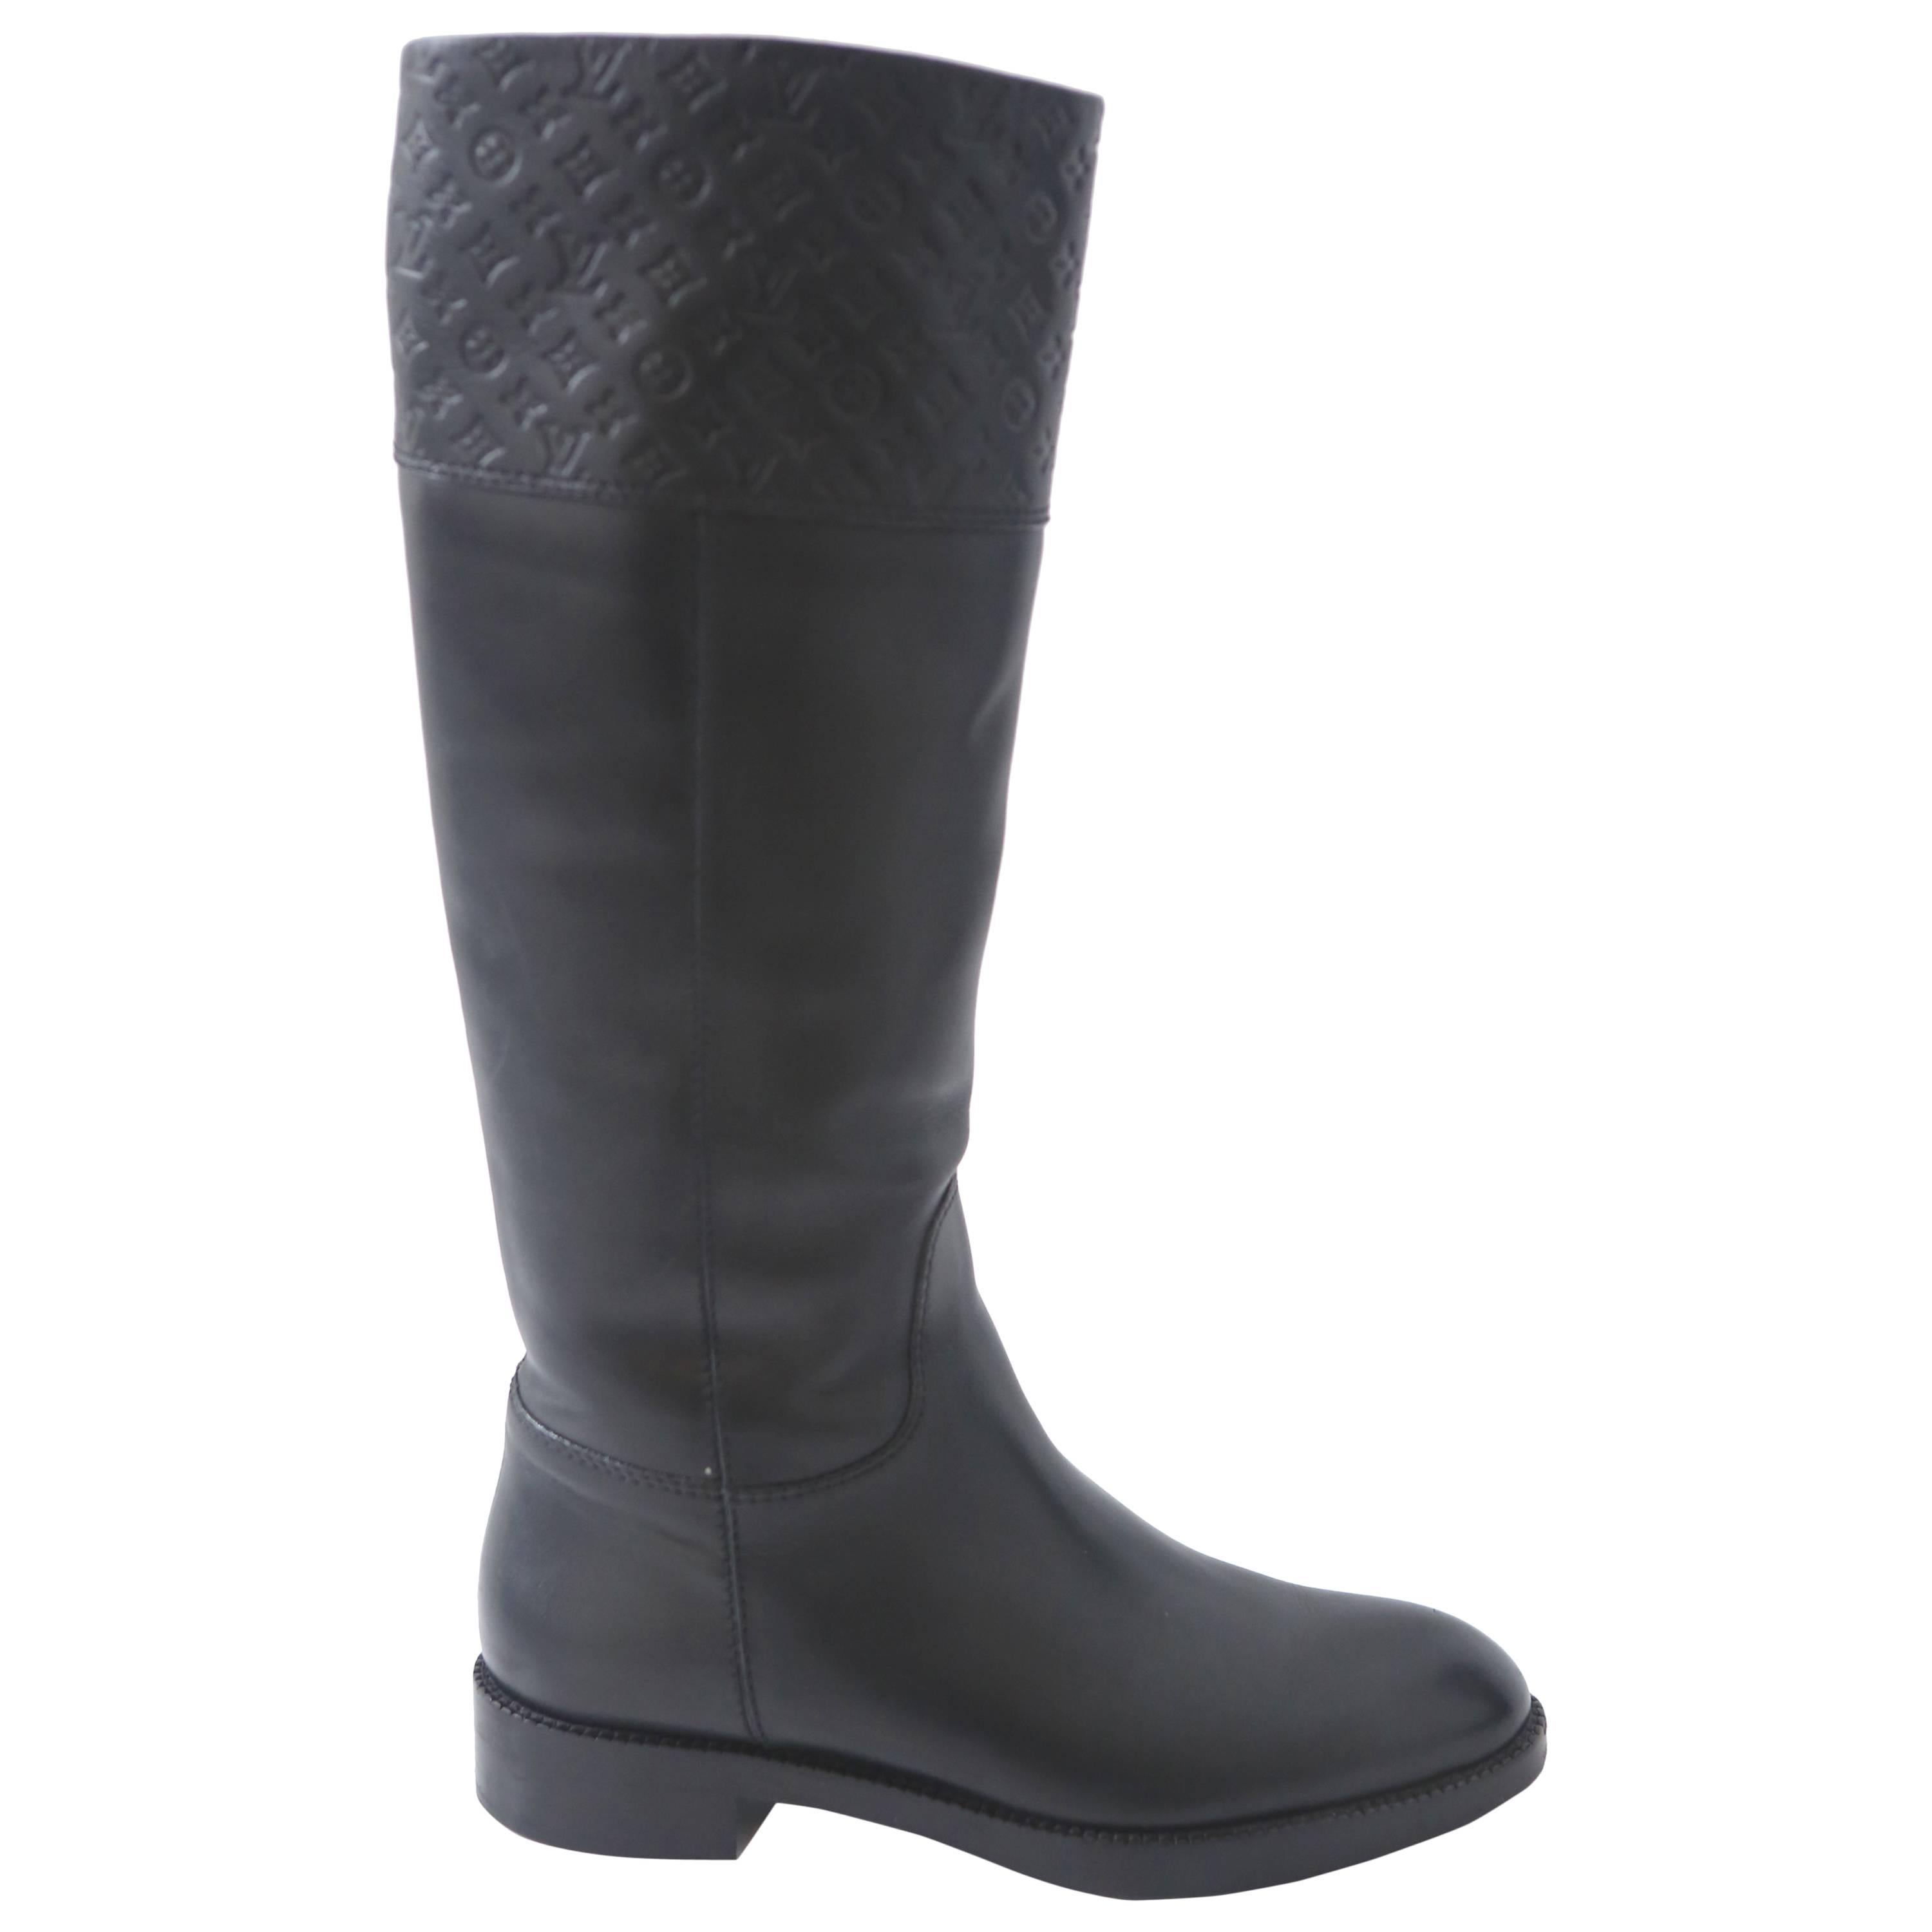 Louis Vuitton Black Leather Riding Boots W/ Embossed Monogram